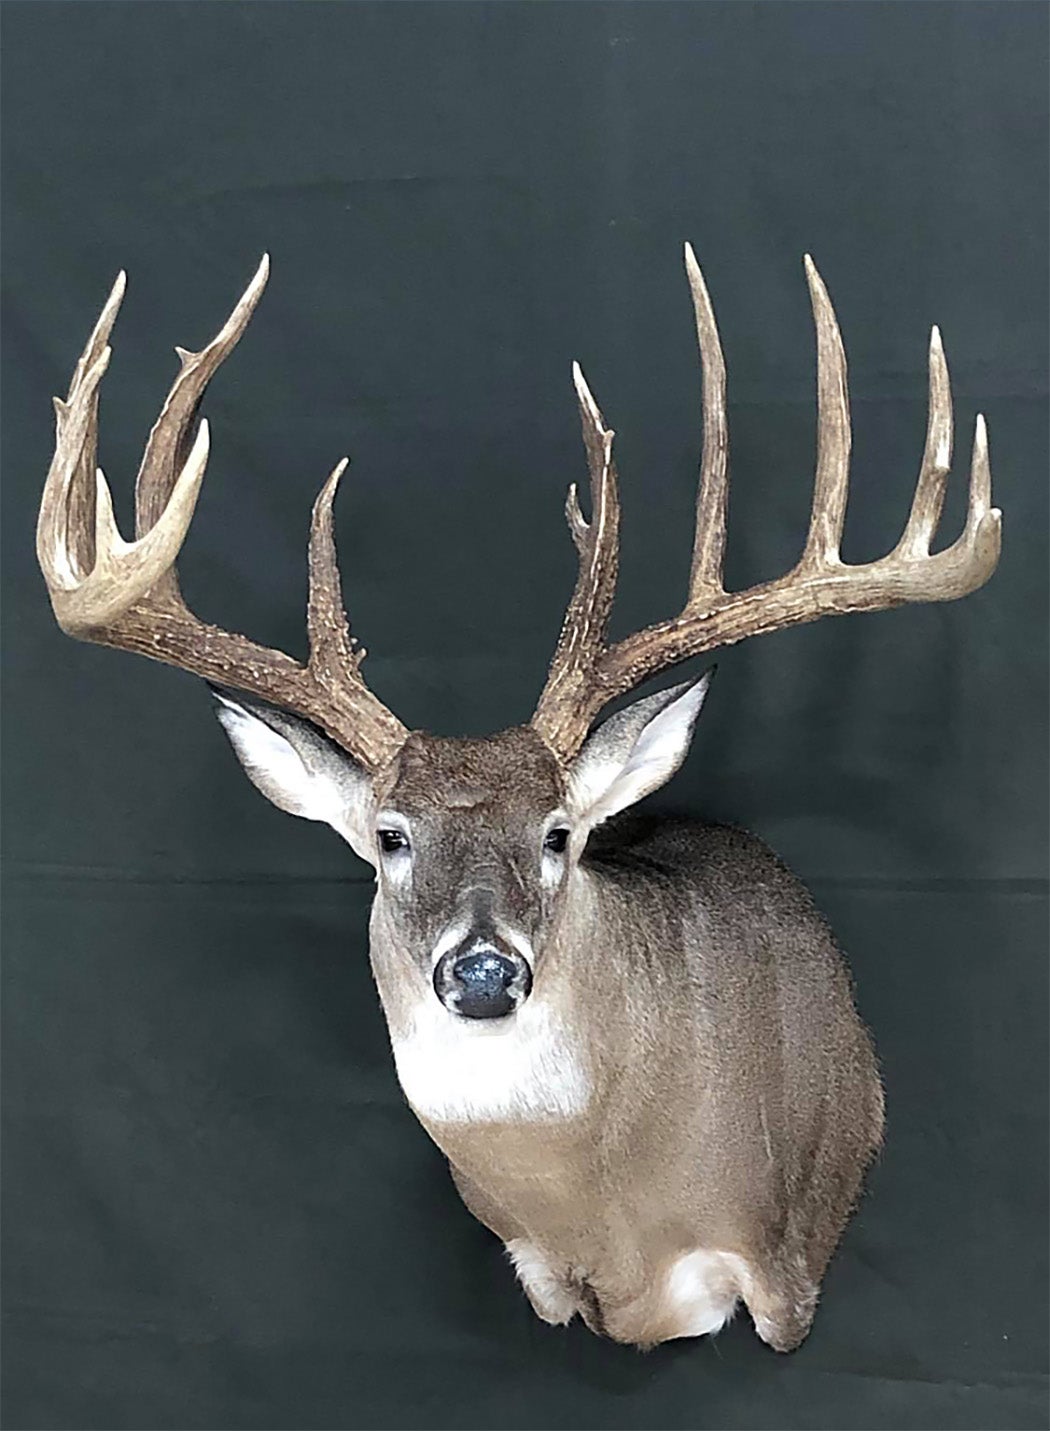 record whitetail deer by state